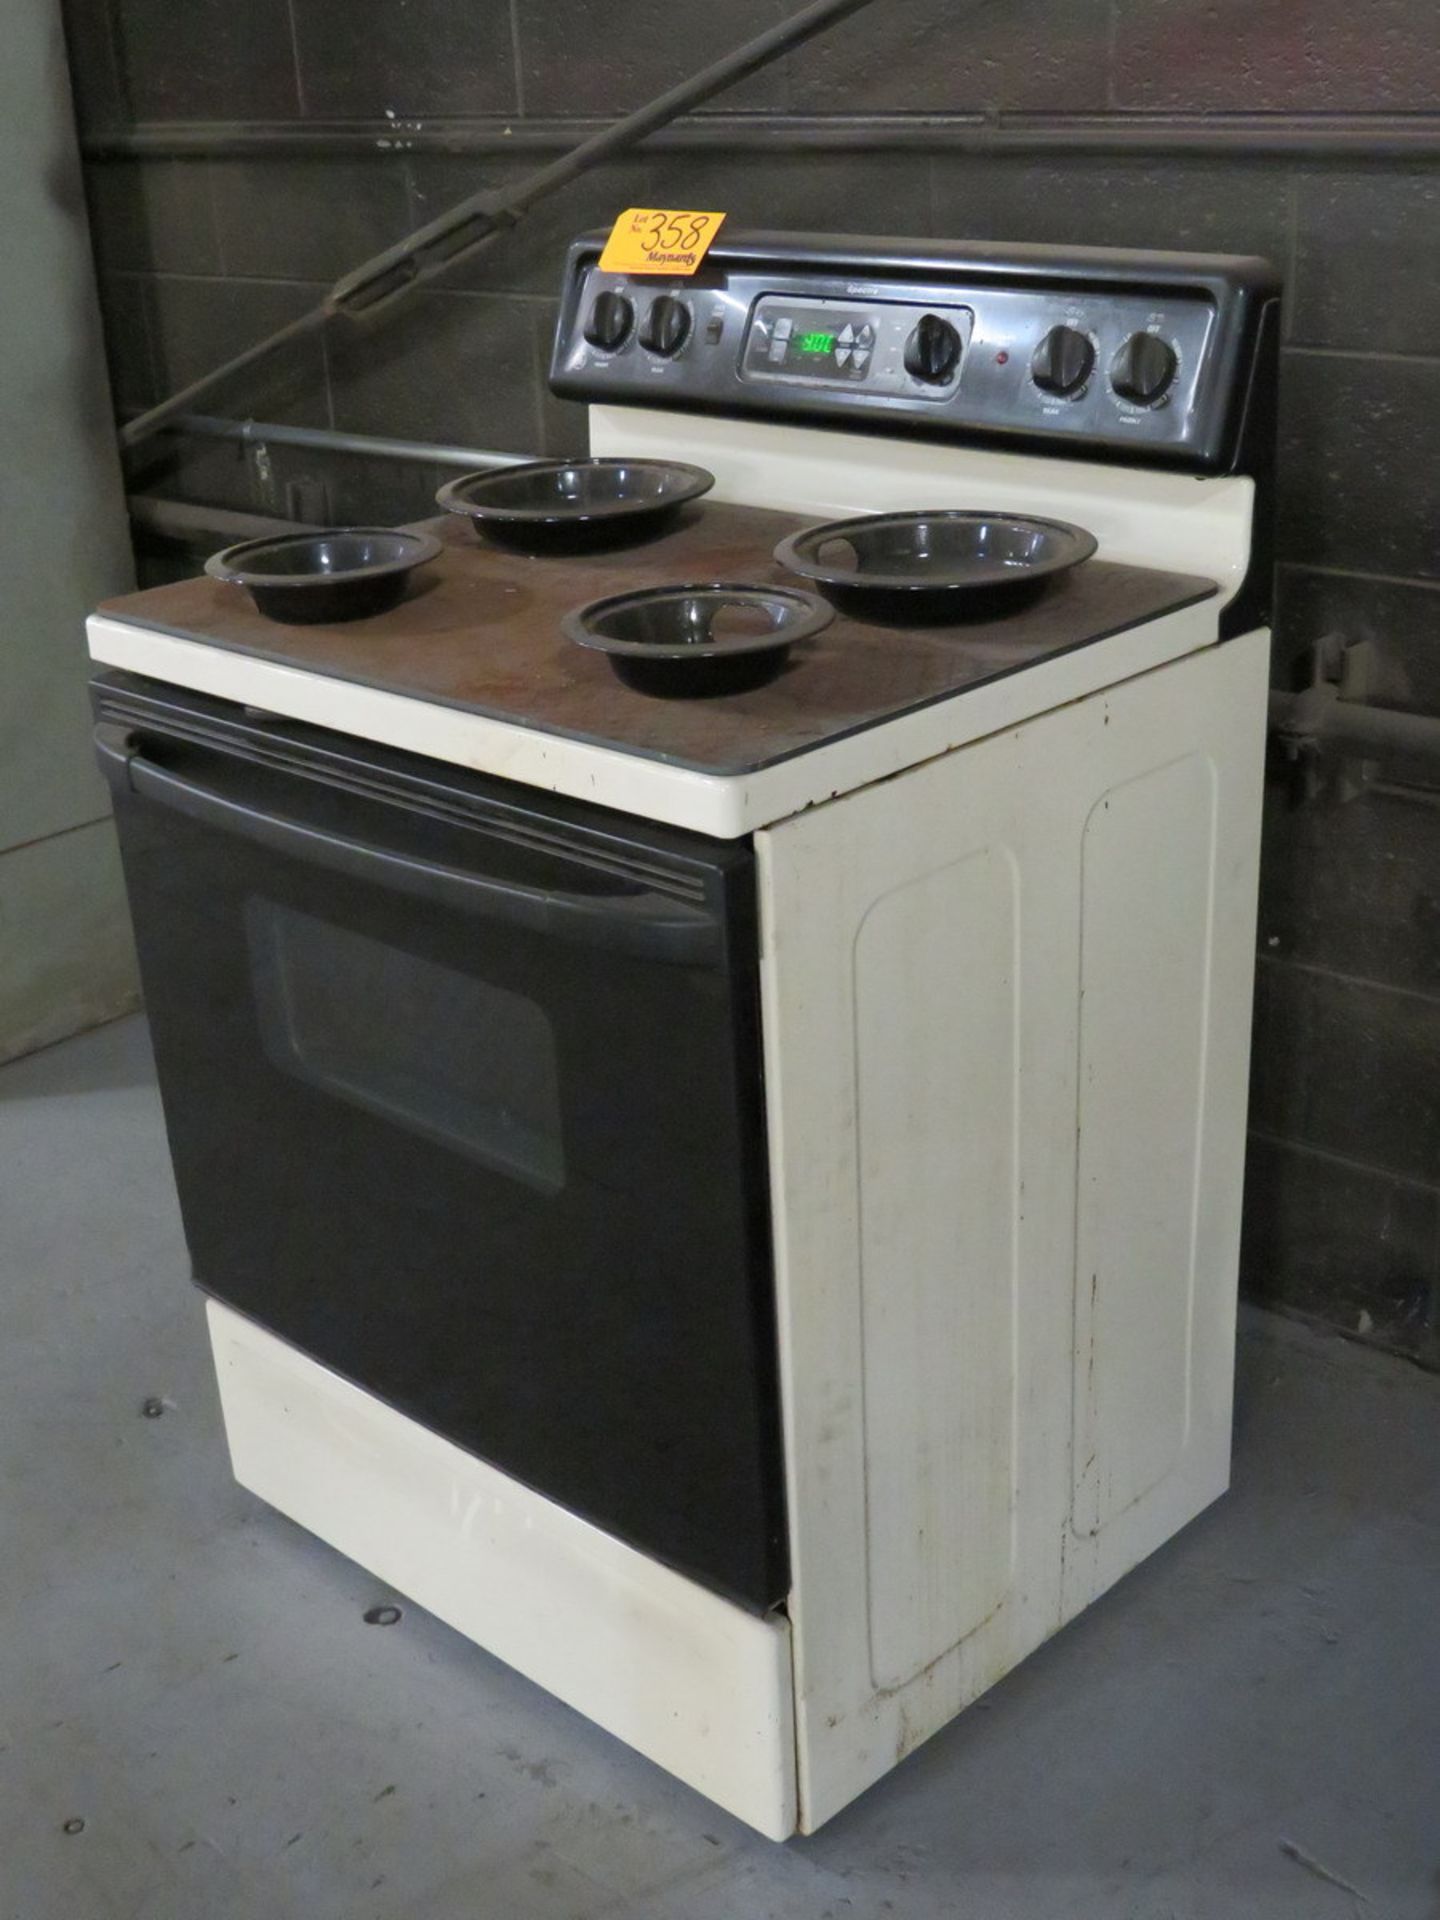 GE Spectra Electric Range with Oven - Image 2 of 5